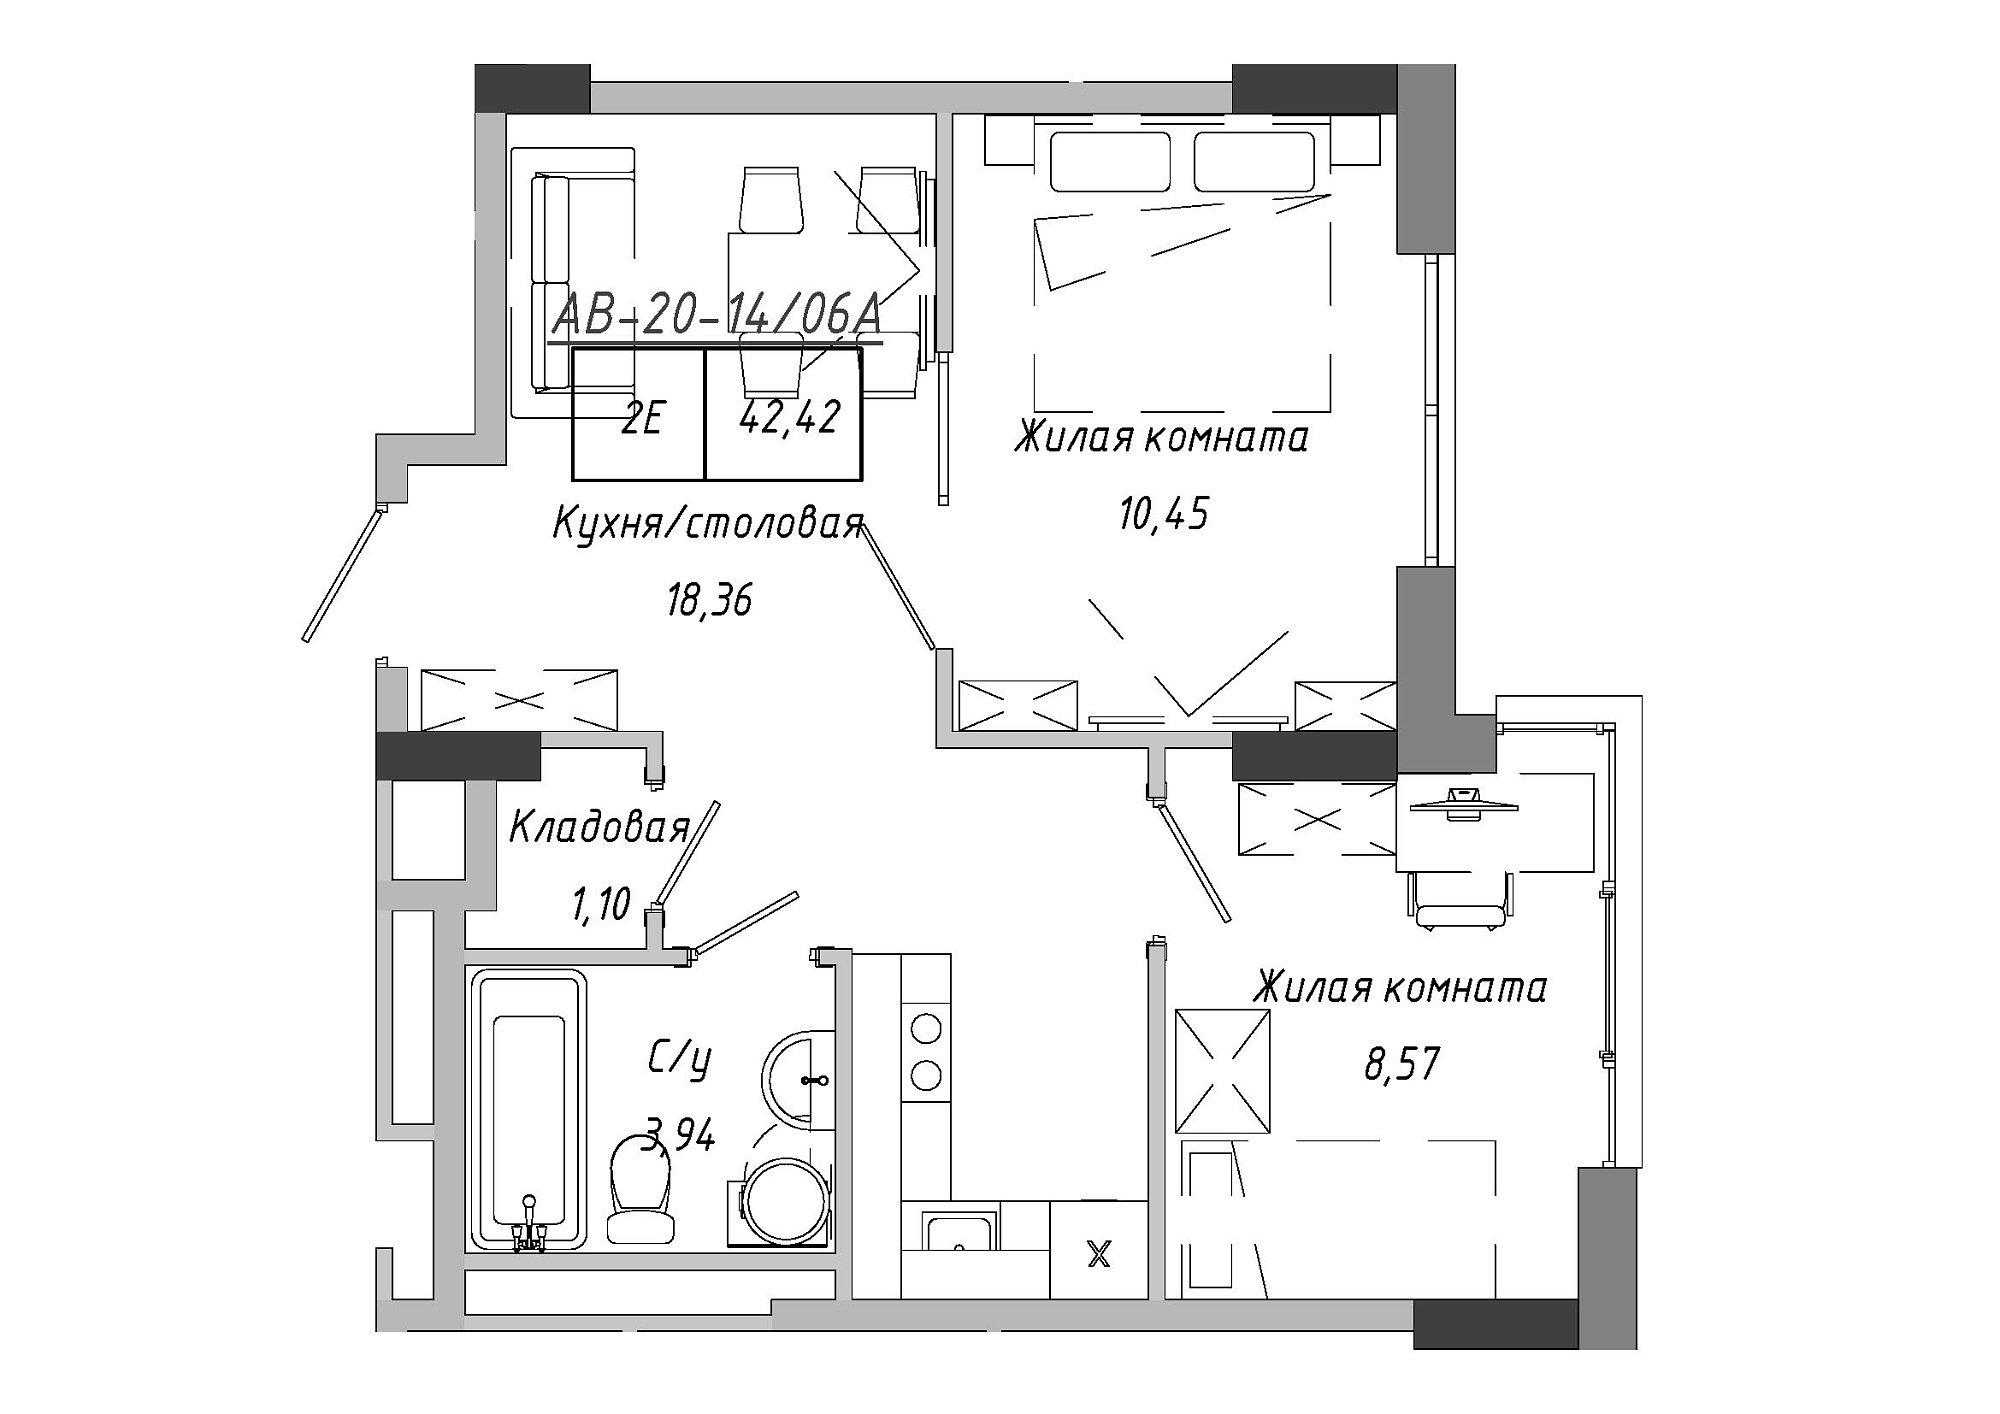 Planning 2-rm flats area 42.42m2, AB-20-14/0106a.